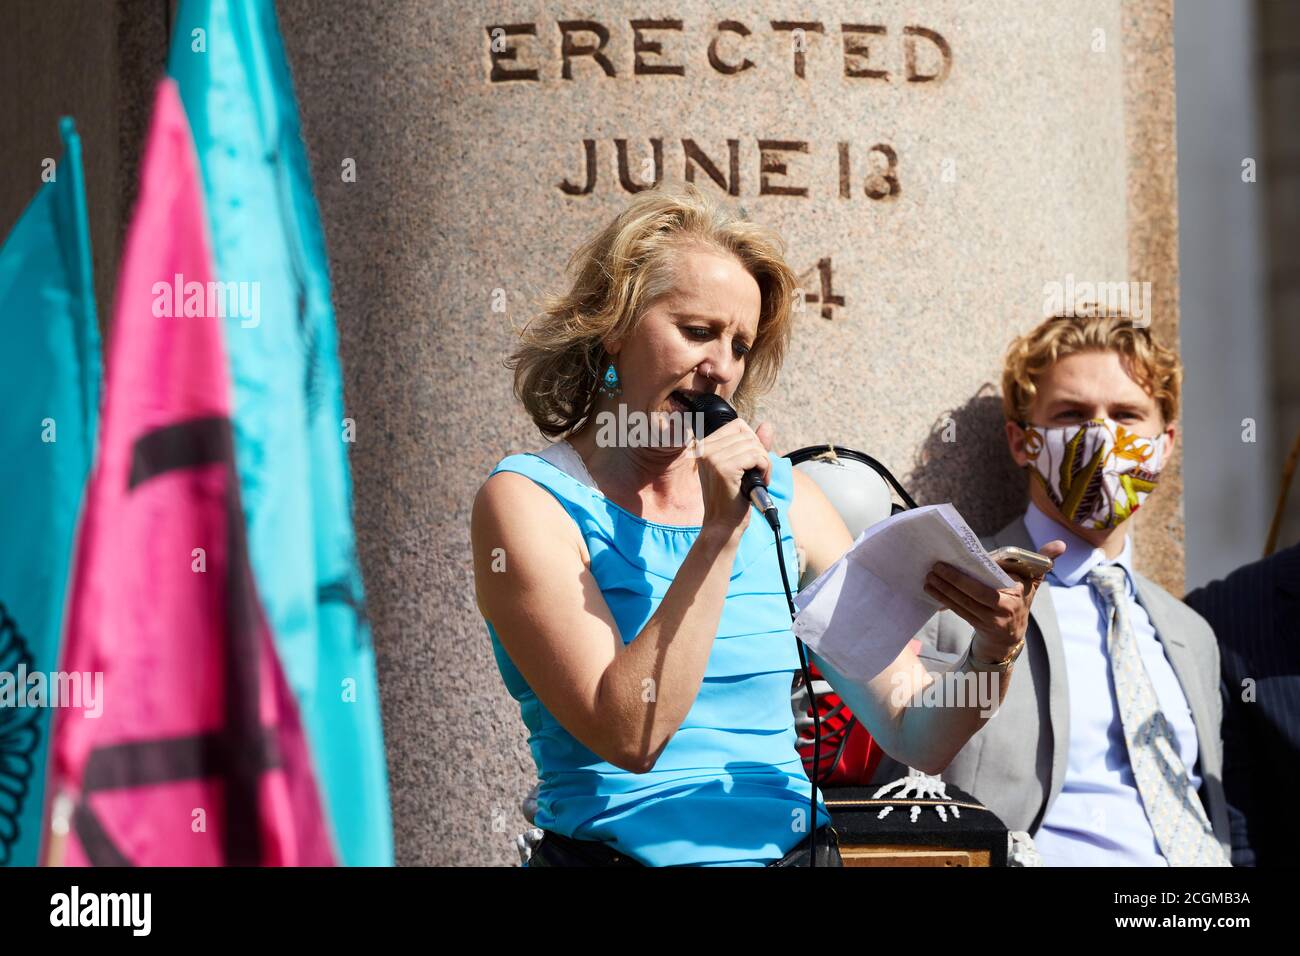 London, UK. - 10 Sept 2020: Gail Bradbrook, Extinction Rebellion co-founder, speaking at a protest by the group at Bank in the City of London. Stock Photo